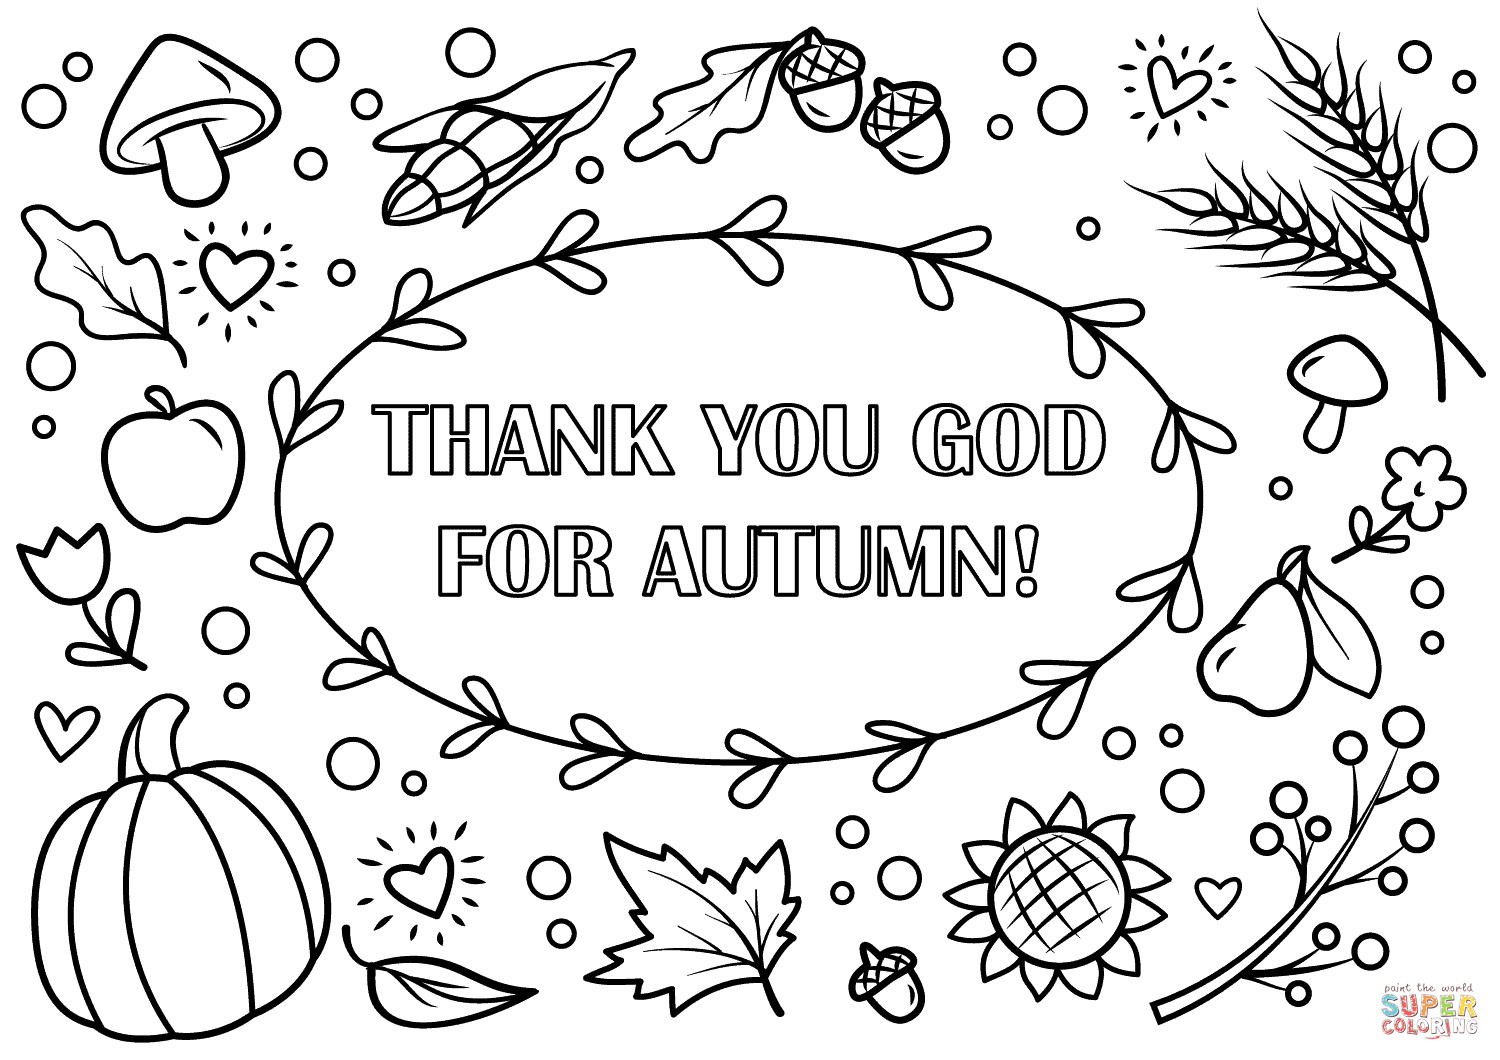 Printable Coloring Pages Fall
 Thank You God for Autumn coloring page